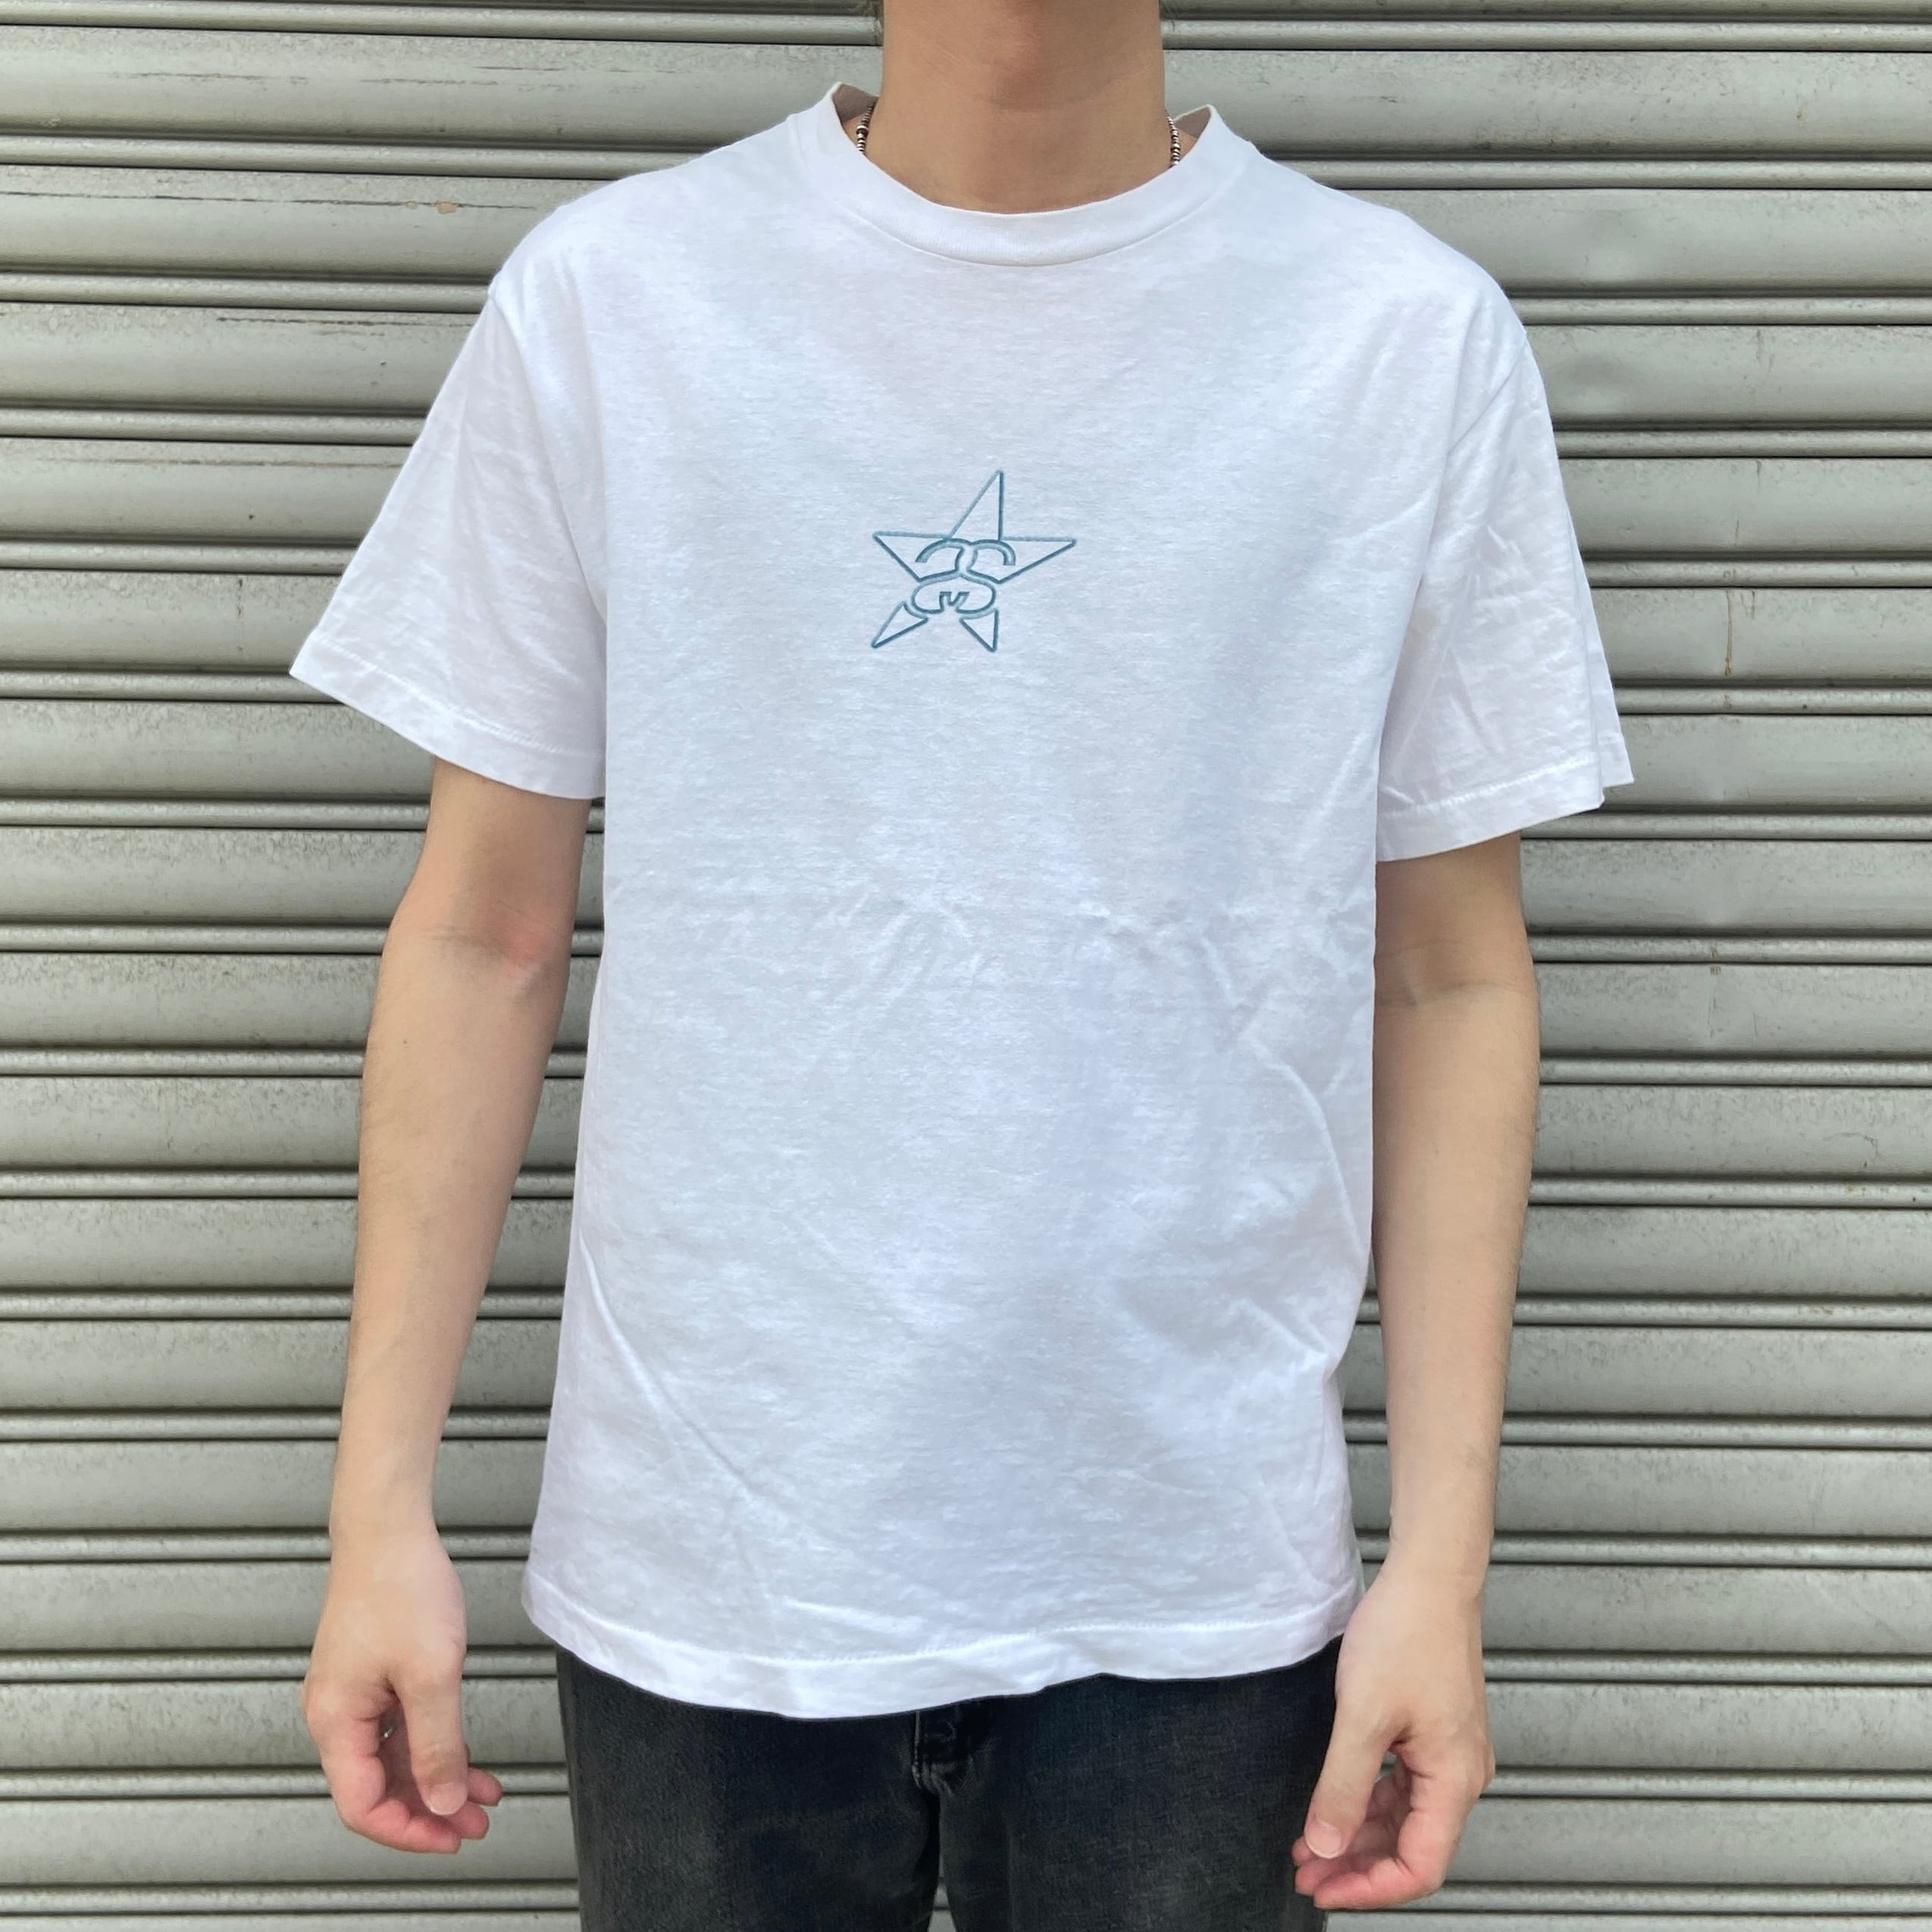 90s USA製　STUSSY 紺タグ　プリントTシャツ　白　M | 古着屋 Uan powered by BASE